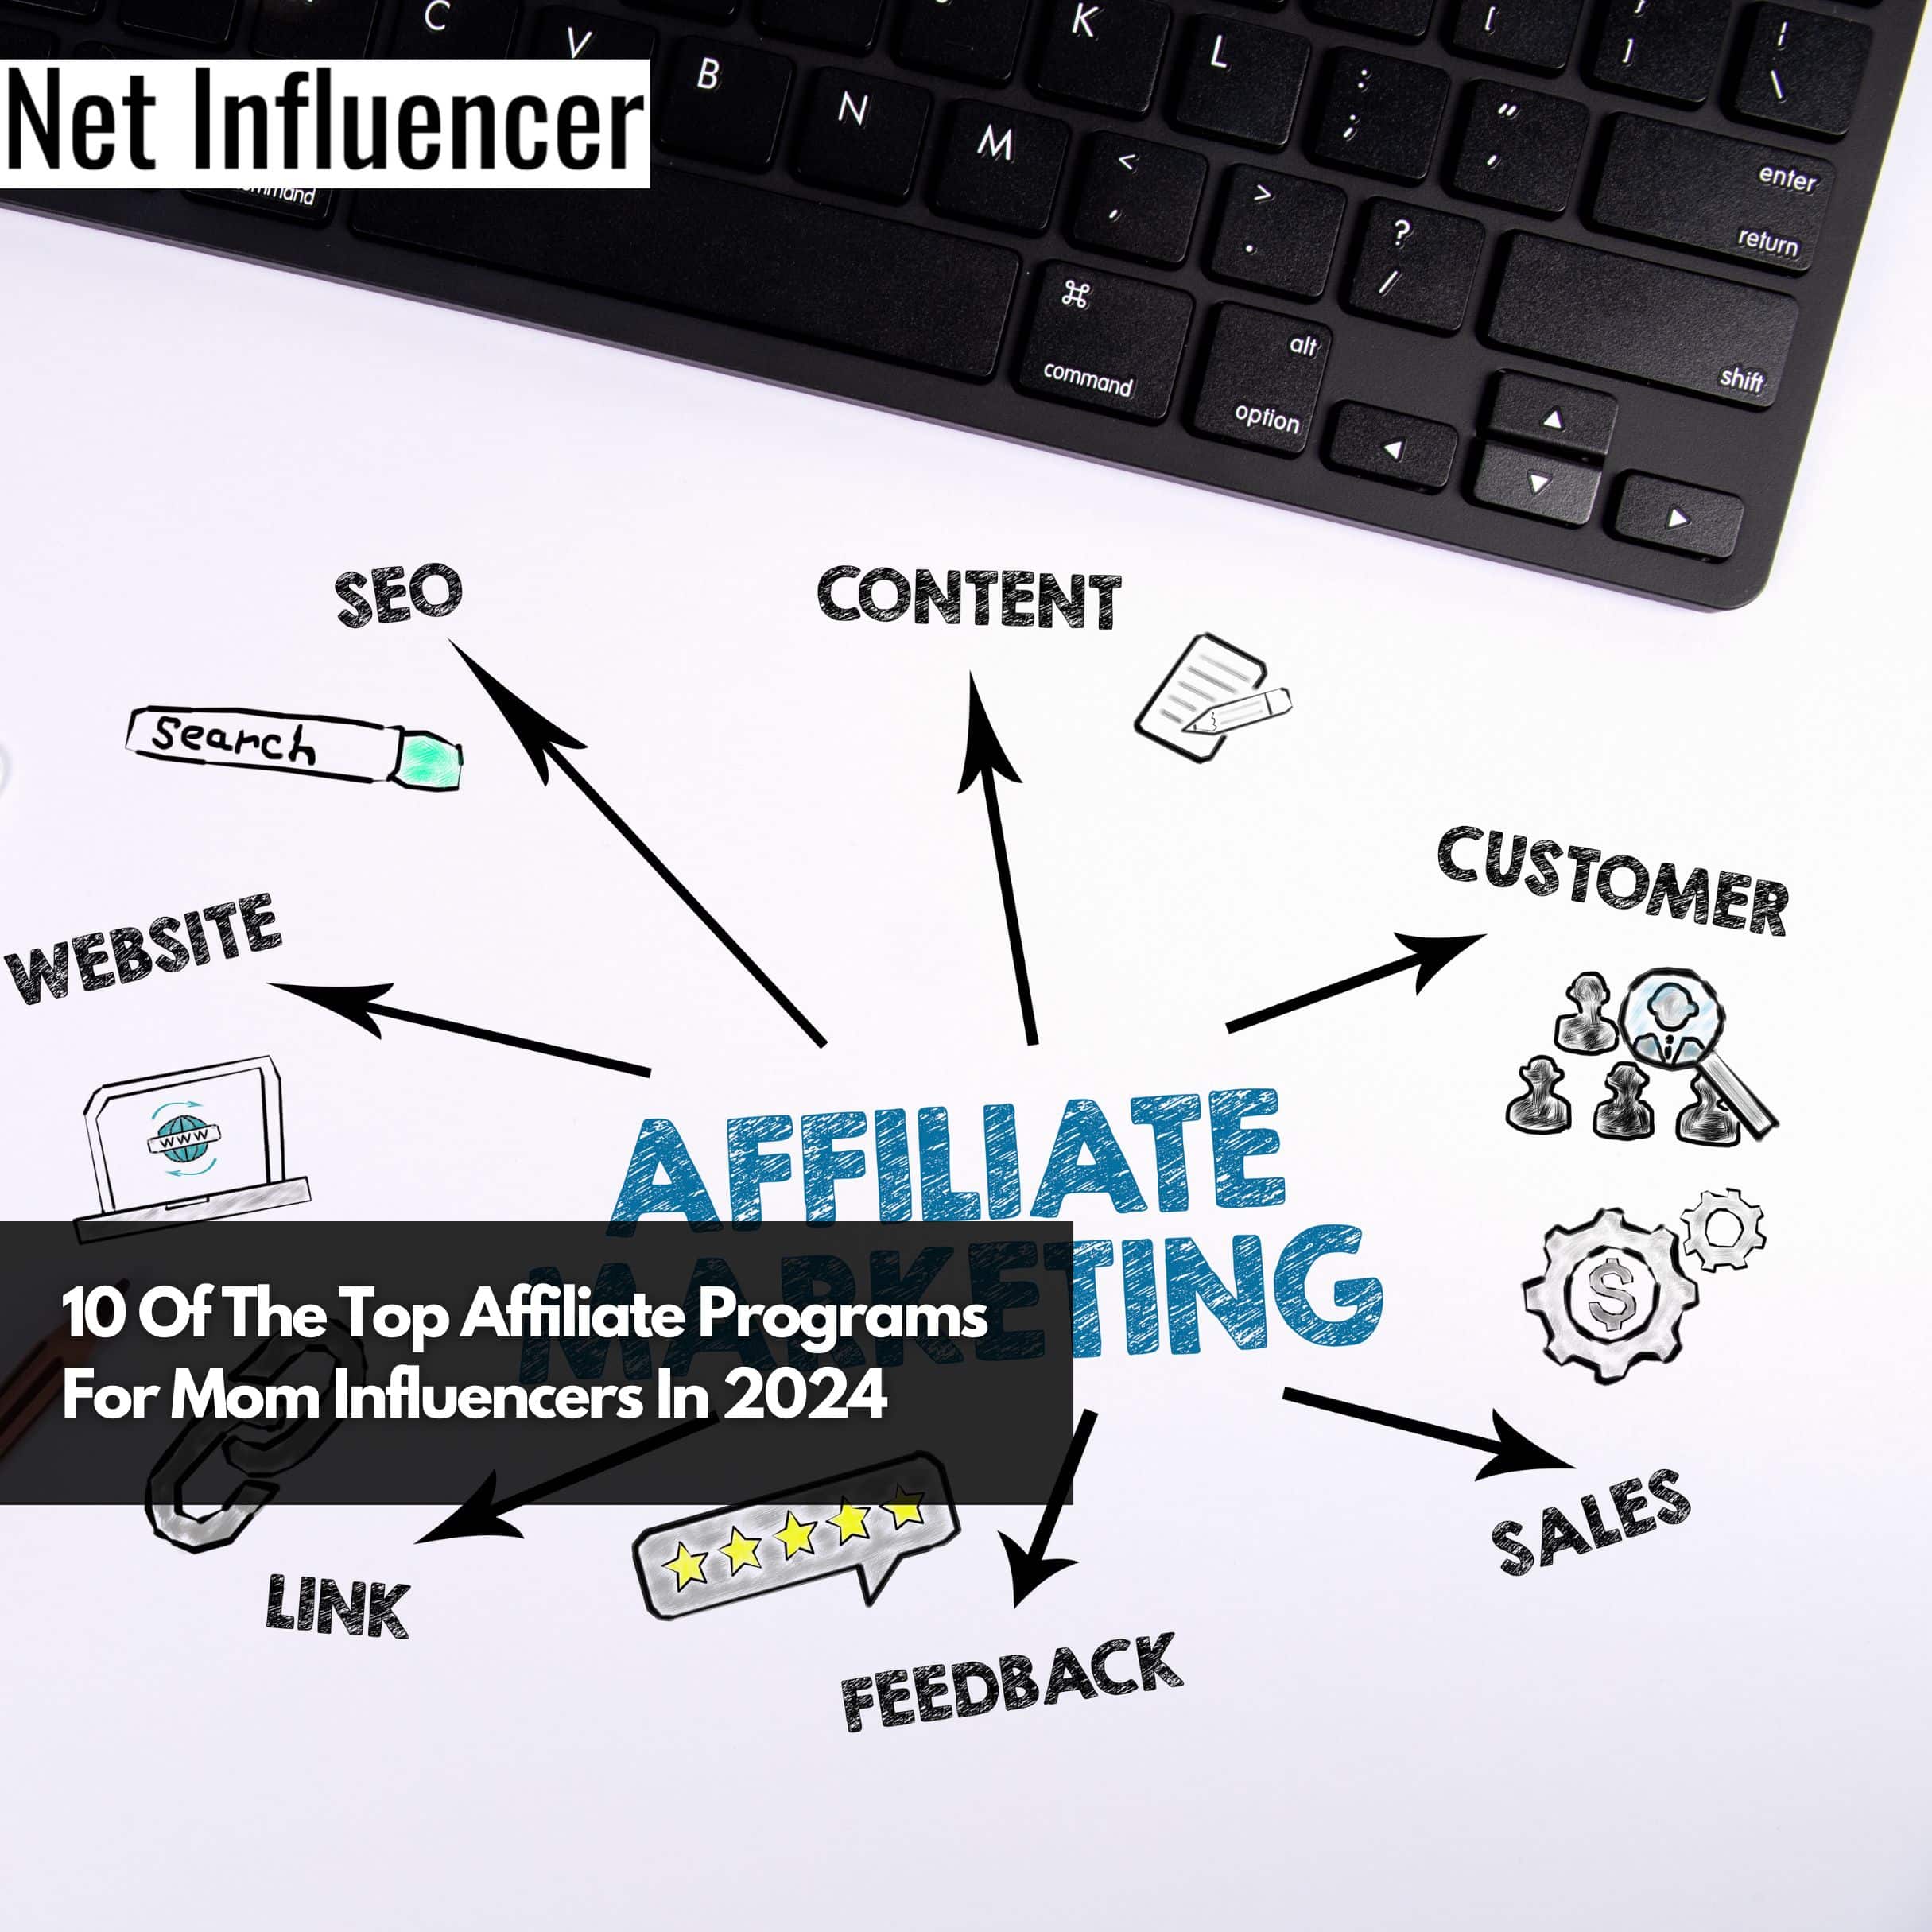 10 Of The Top Affiliate Programs For Mom Influencers In 2024